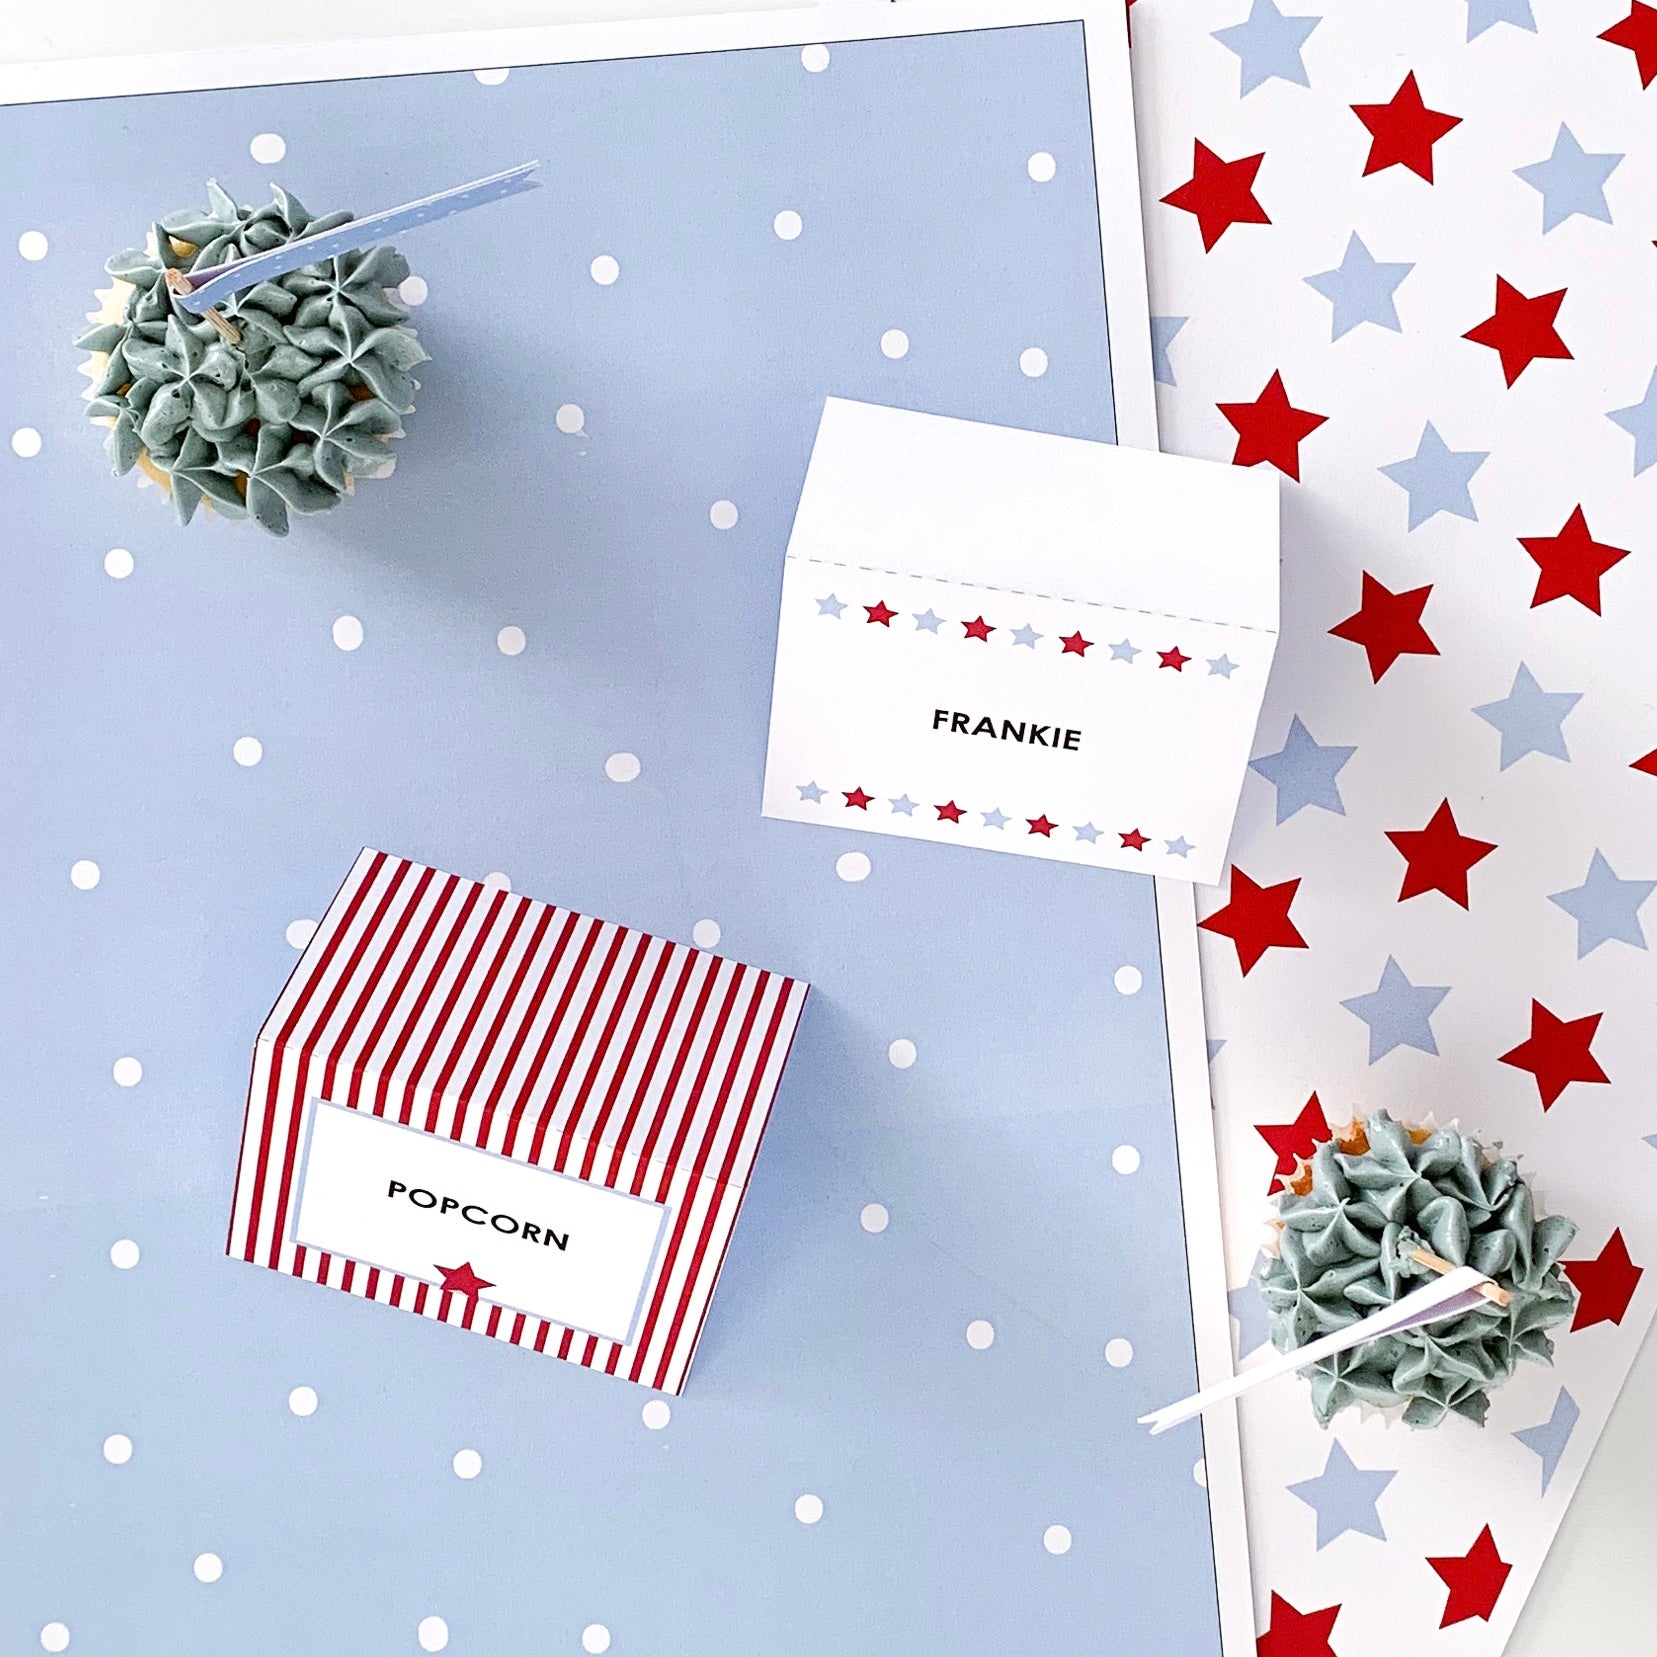 Circus or carnival themed folded labels with stripes and stars - The Printable Place